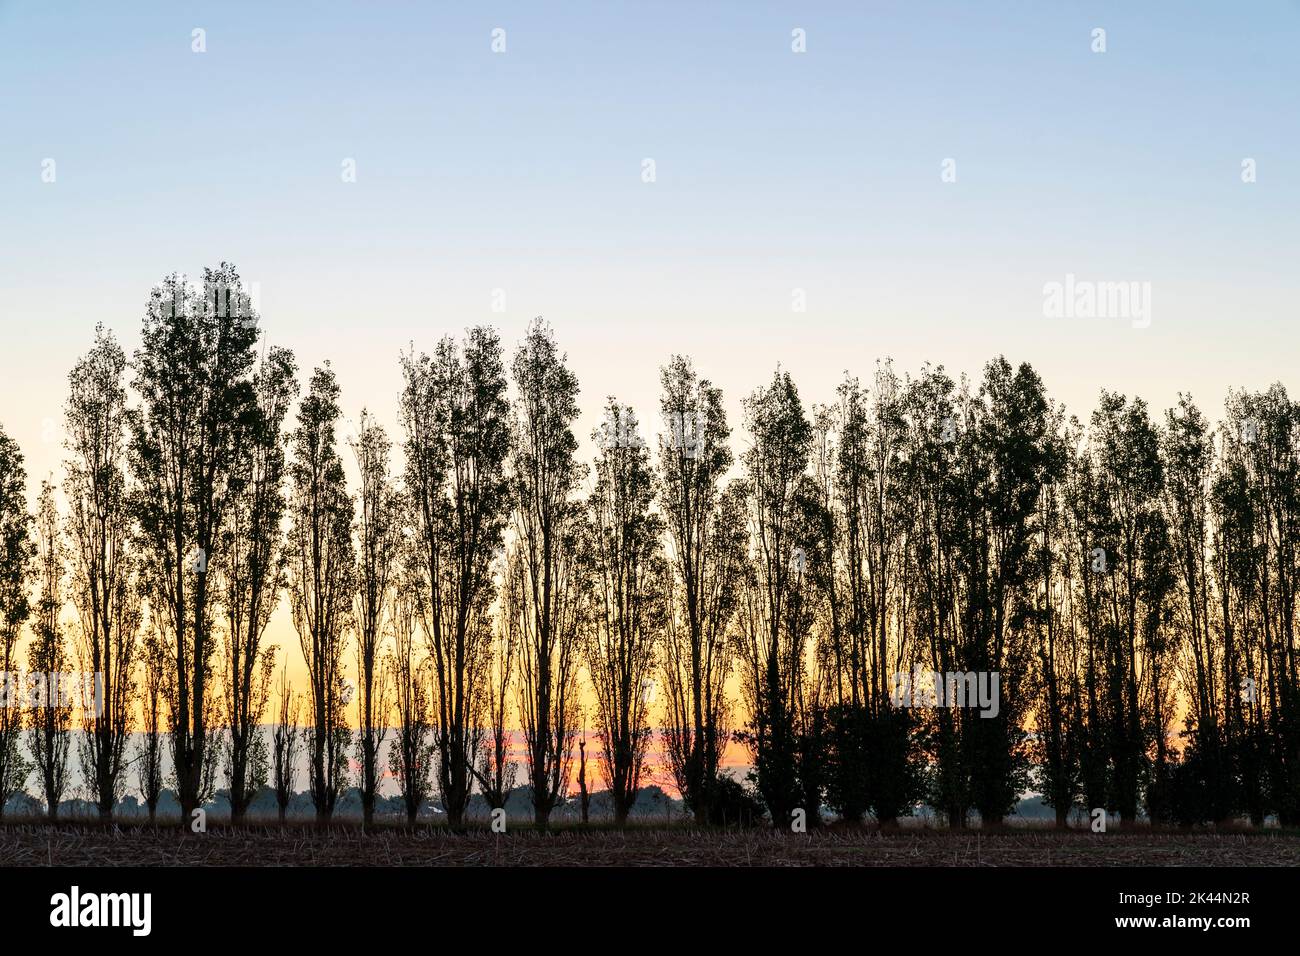 The dawn sky with on the horizon a row of silhouetted poplar trees in the autumn. Sky behind the trees is yellow and orange, turning blue above the trees. Stock Photo